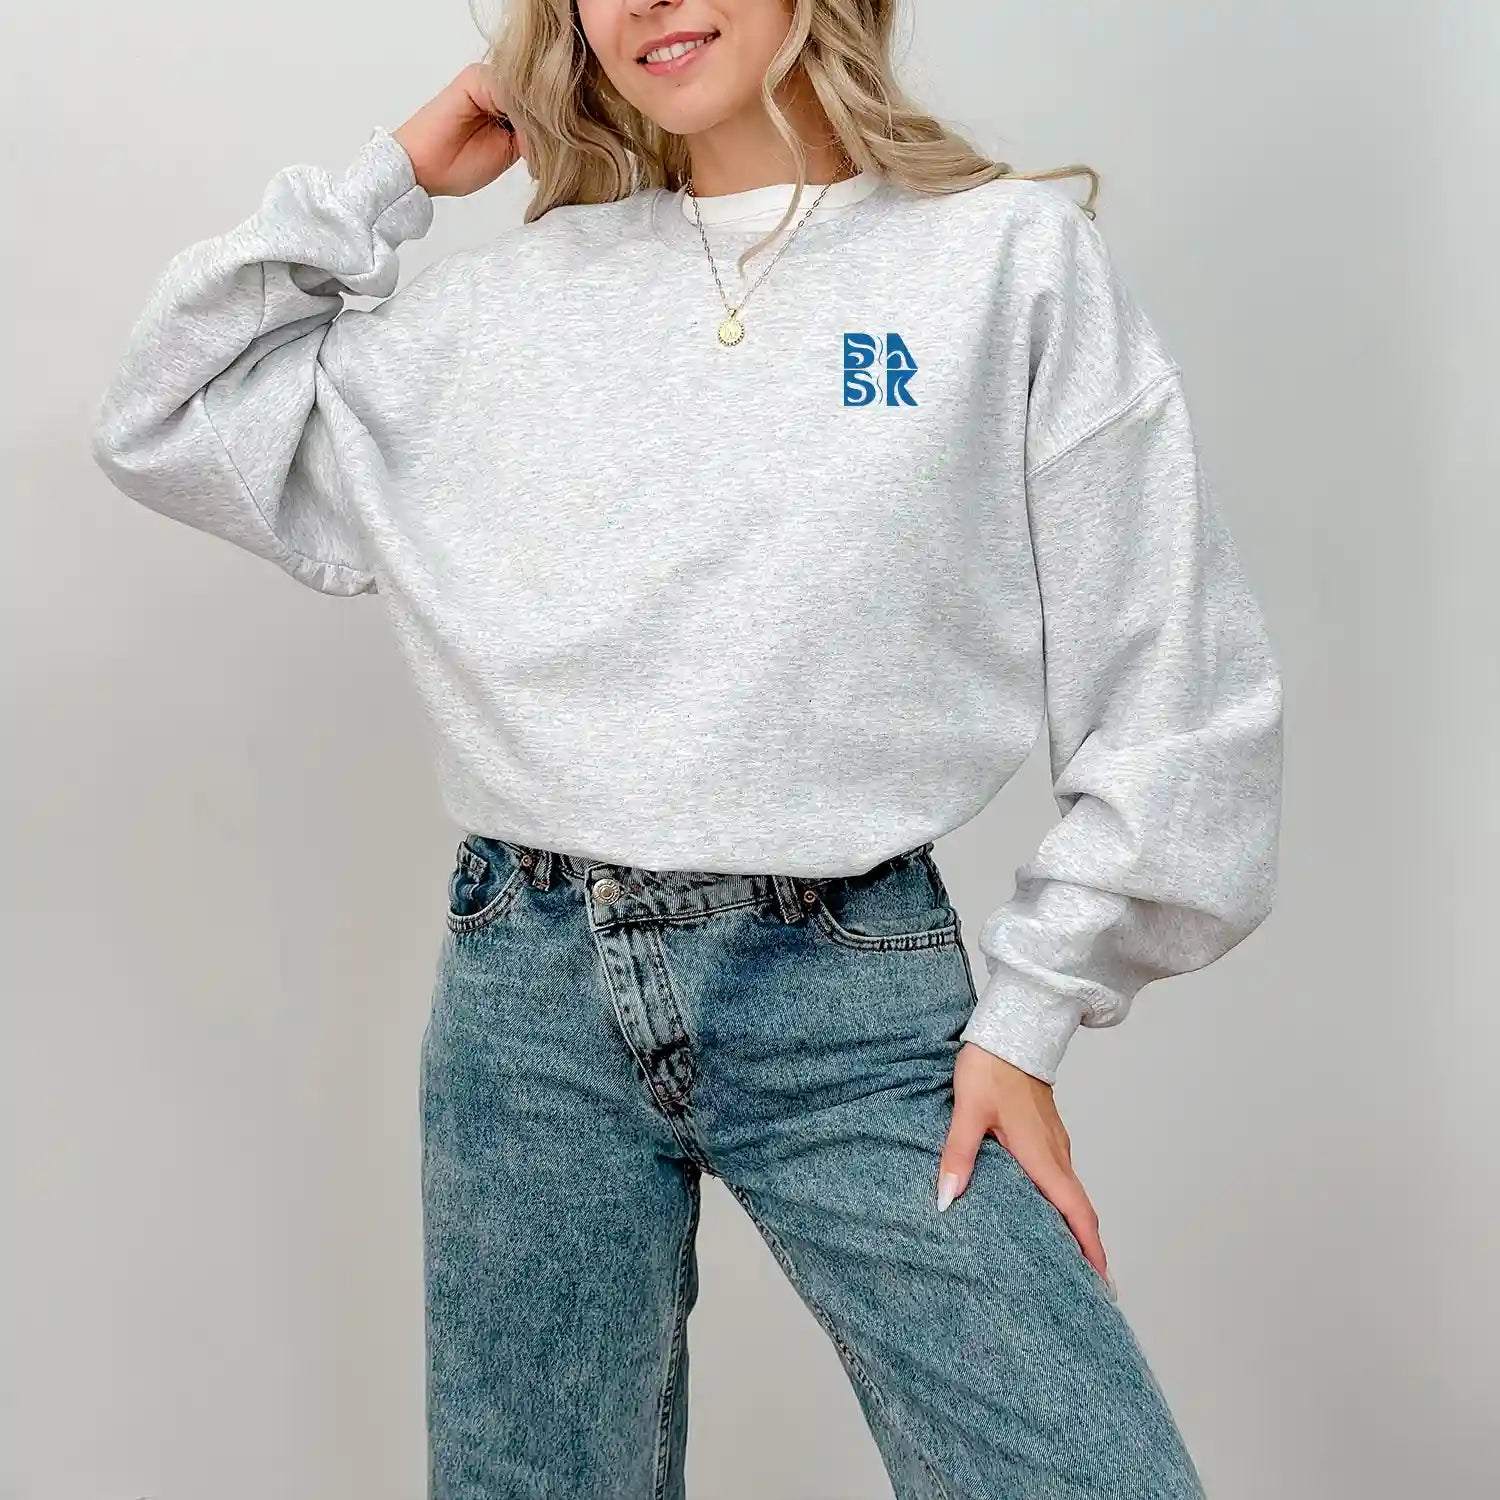 A woman, dressed in casual attire of a grey sweatshirt and jeans, proudly showcases her Be Still and Know Kupa'a Tide Sweatshirt.